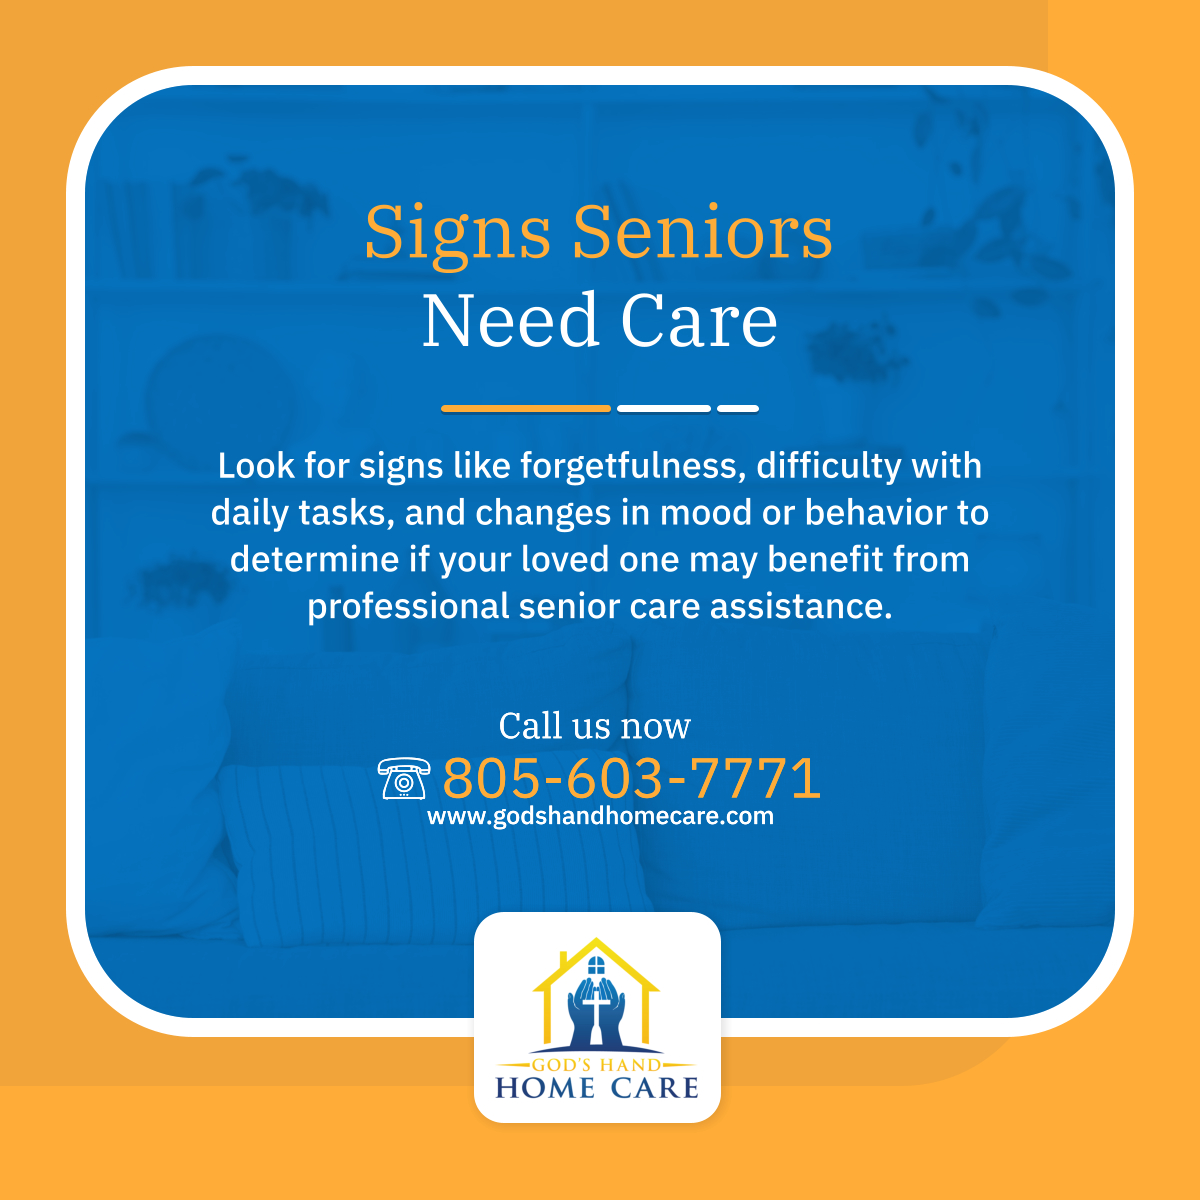 Identifying when seniors need care is crucial for their safety and well-being. Stay attentive to subtle signs and seek support to ensure their needs are met. 

#OxnardCA #HomeCare #SeniorCareNeeds